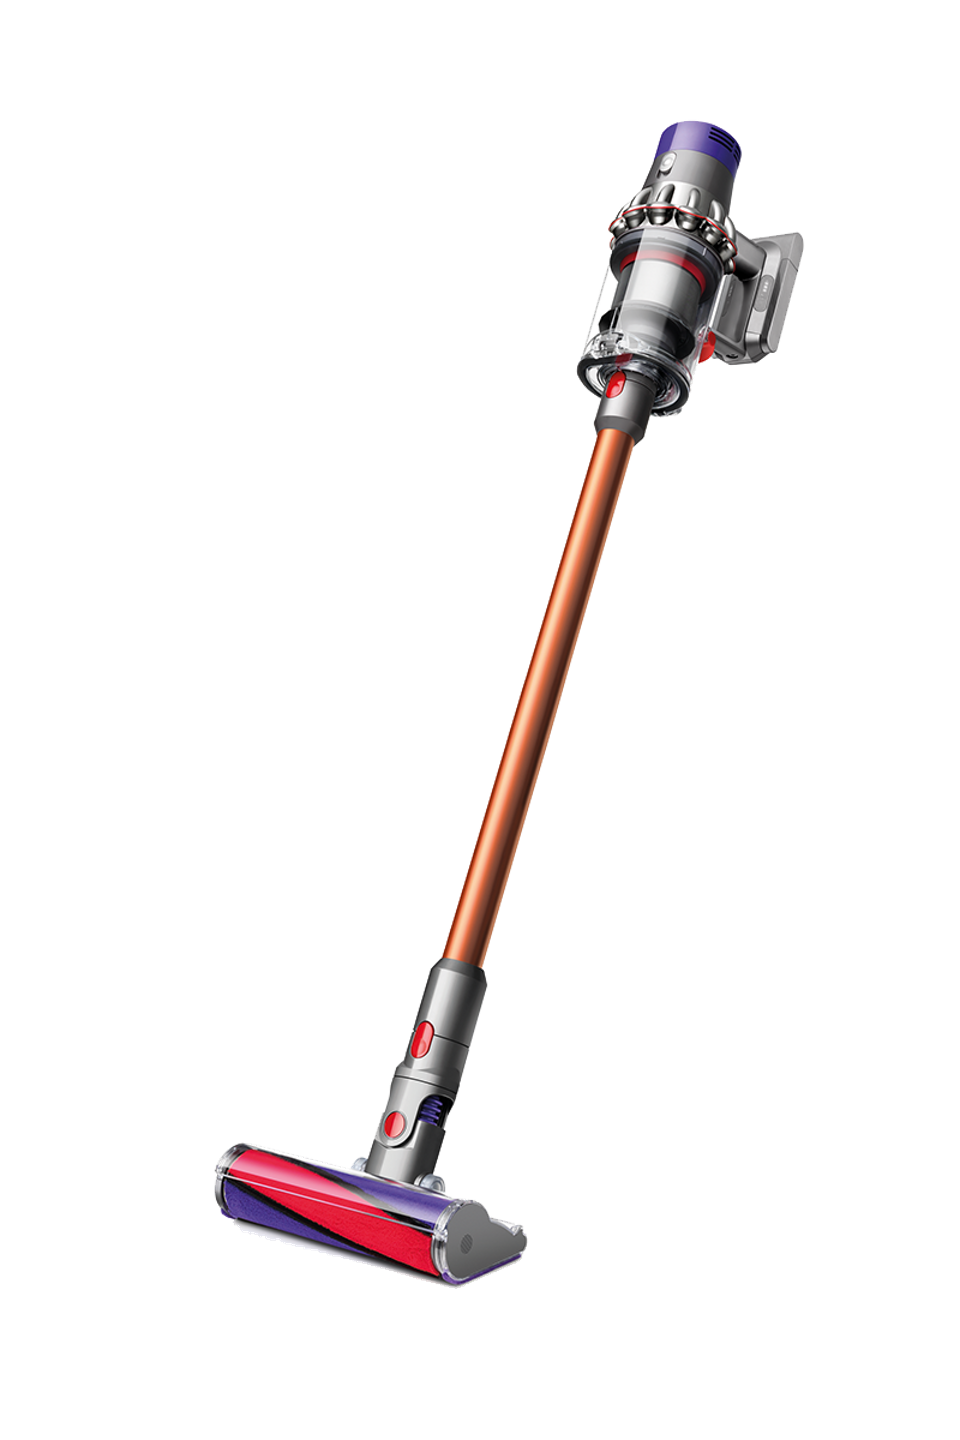 DYSON Cyclone V10 Absolute Cordless Vacuum Cleaner